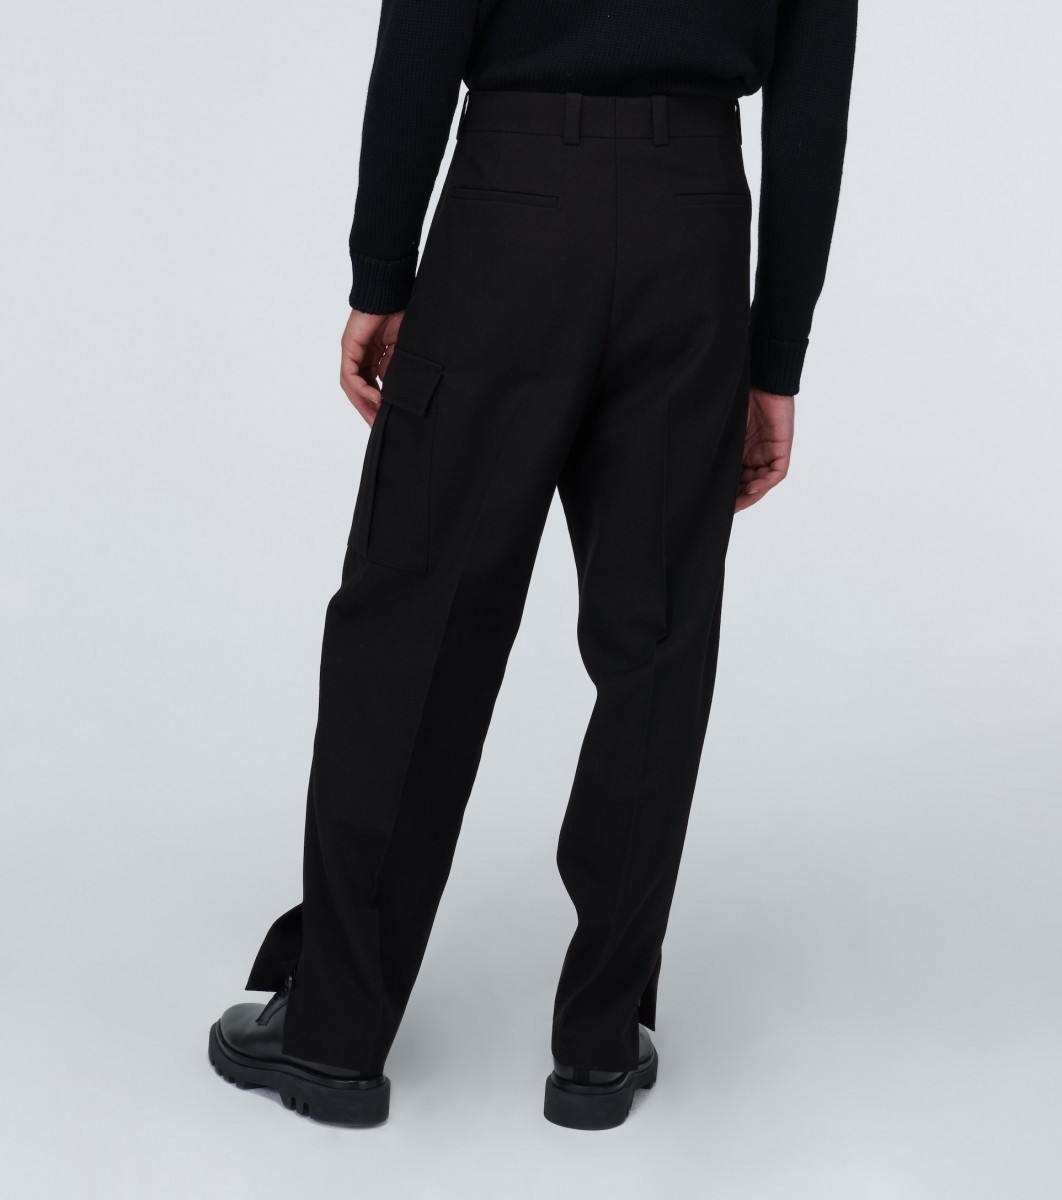 BNWT AW20 OAMC COLONEL WOOL PANTS 44 - 16